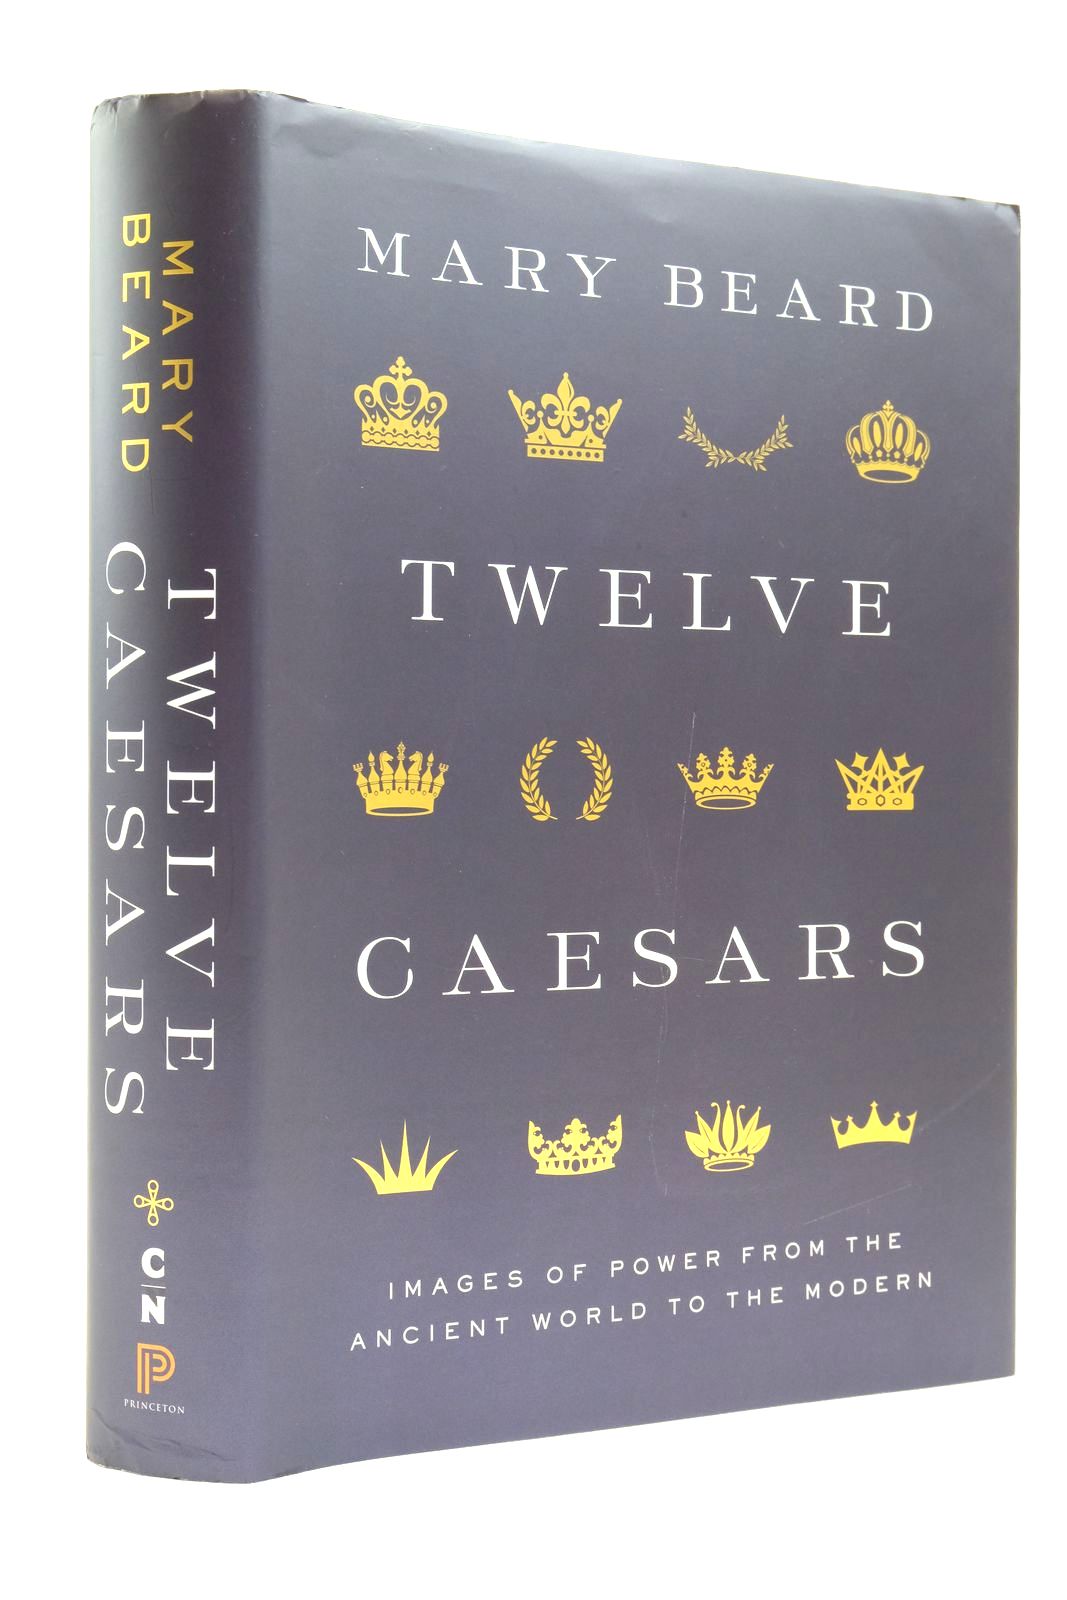 Photo of TWELVE CAESARS: IMAGES OF POWER FROM THE ANCIENT WORLD TO THE MODERN written by Beard, Mary published by Princeton University Press (STOCK CODE: 2138834)  for sale by Stella & Rose's Books